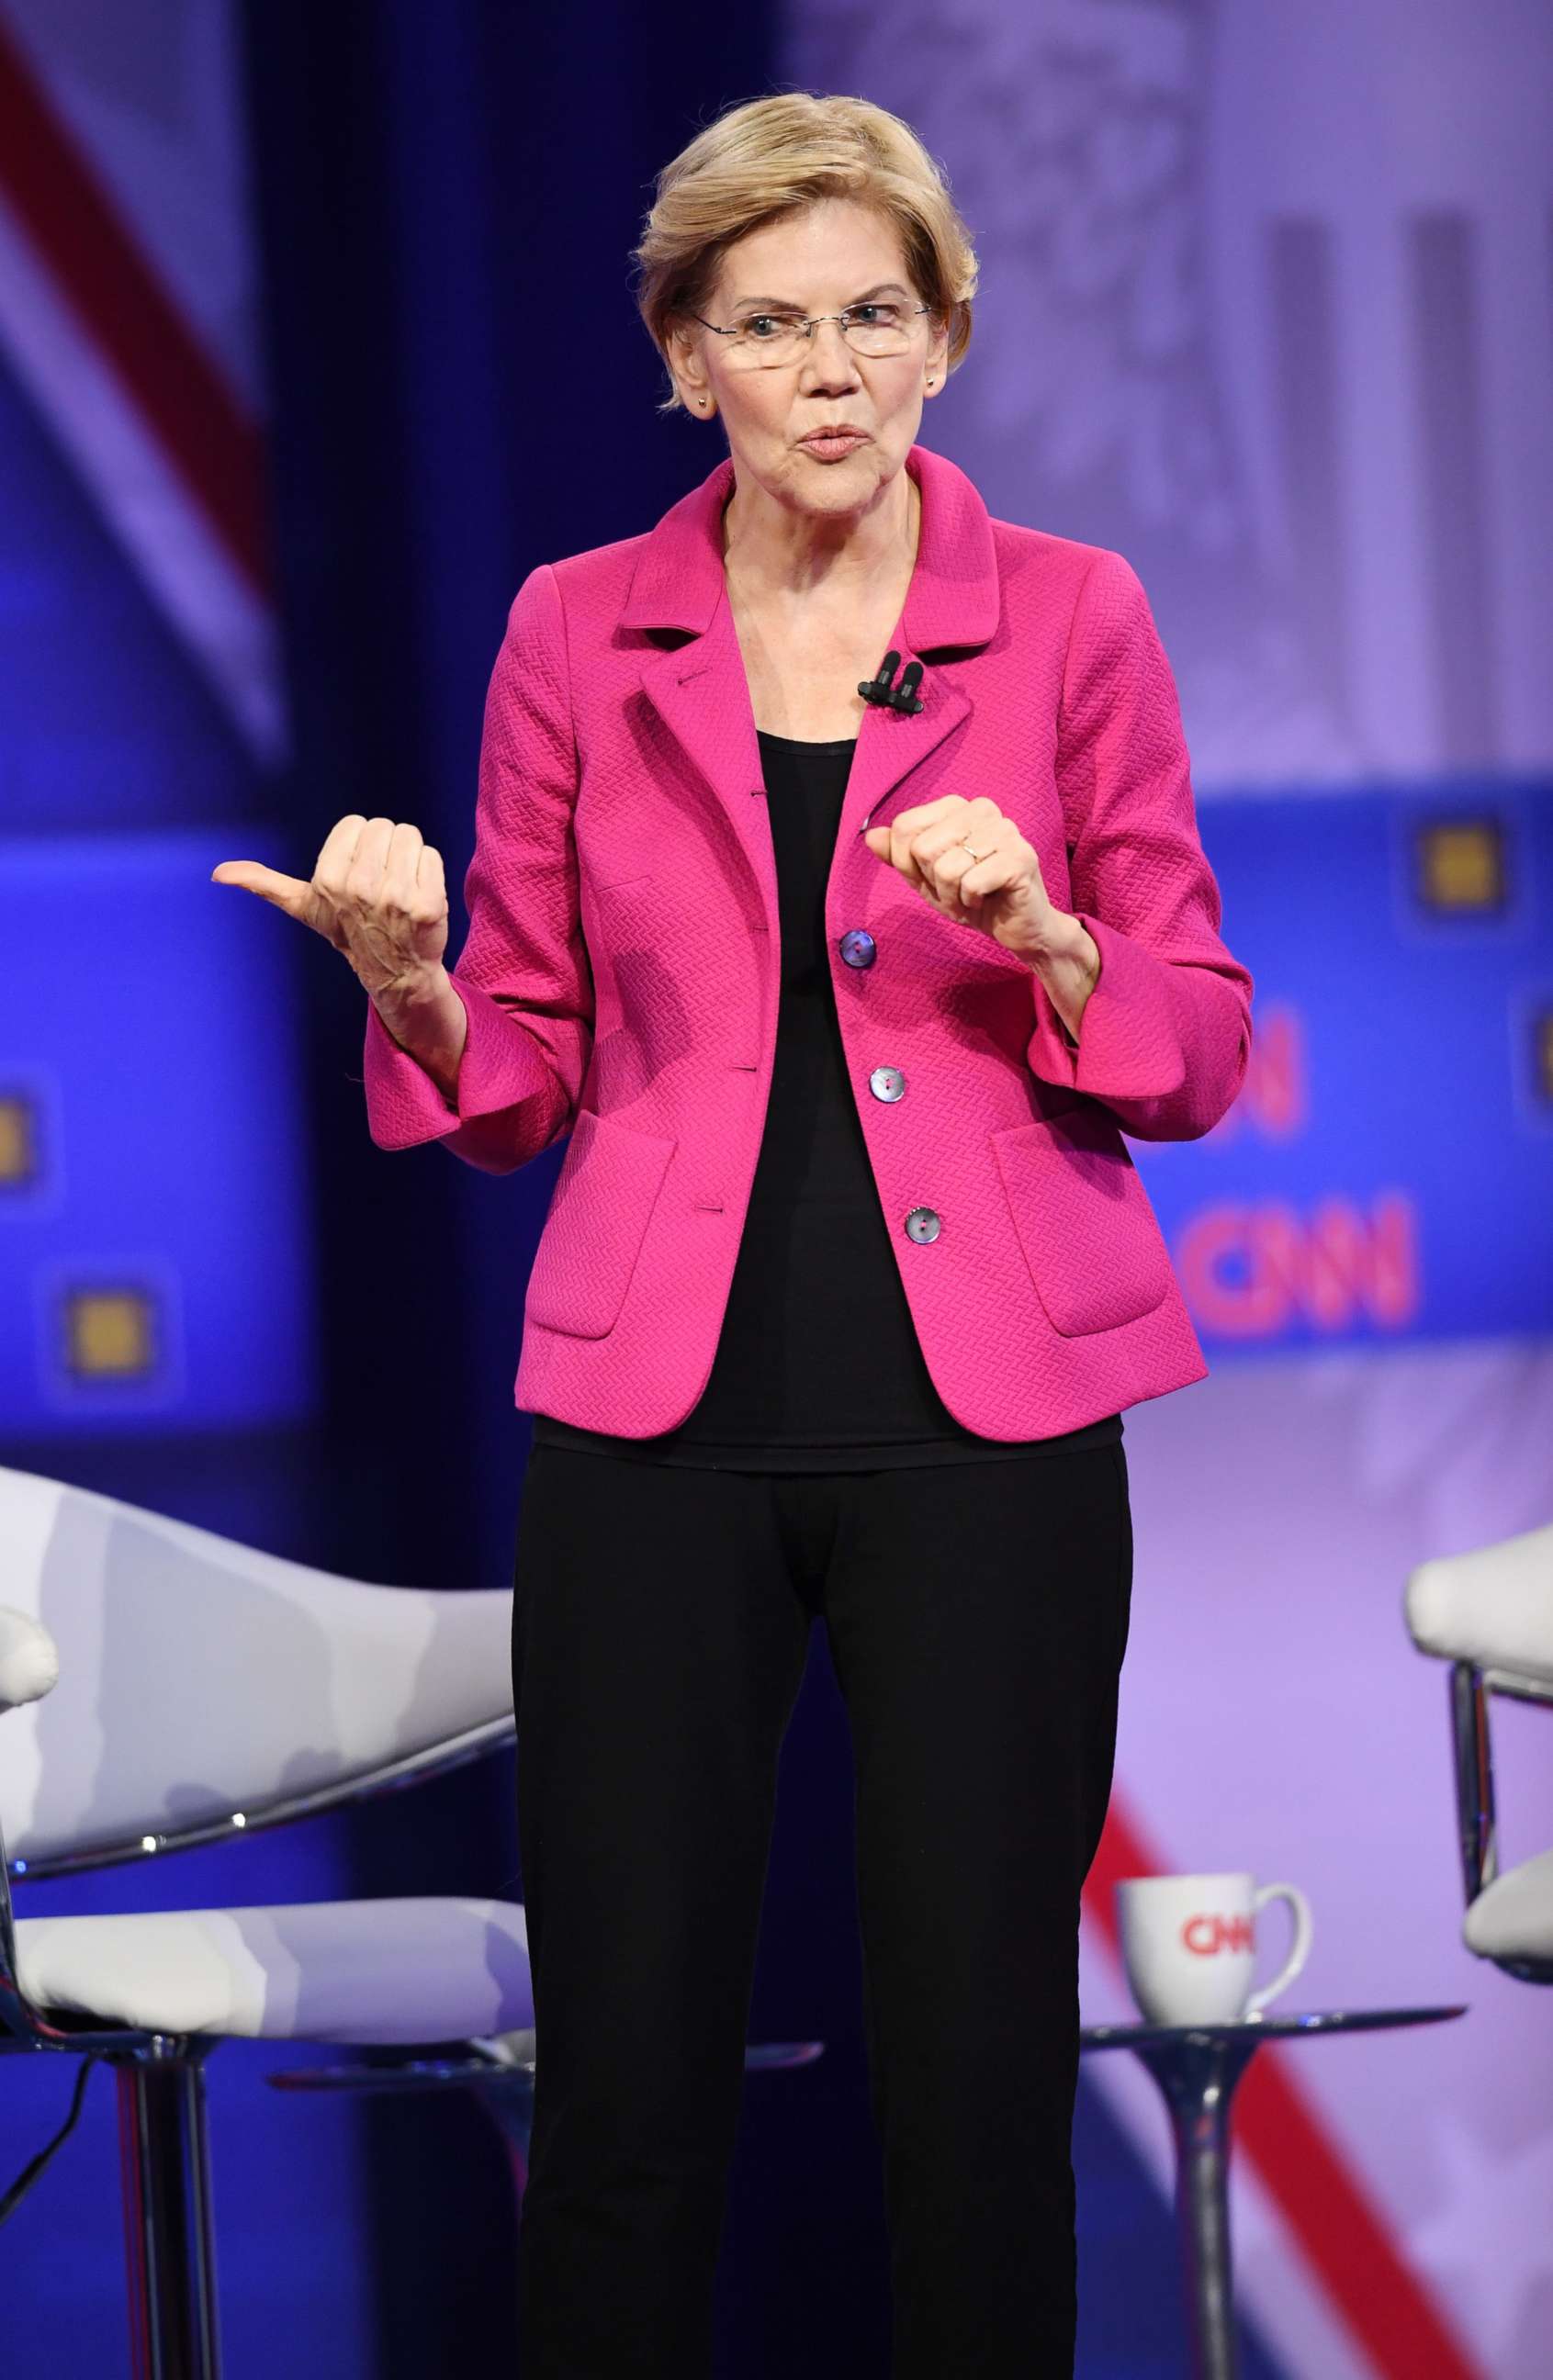 PHOTO: Democratic presidential hopeful Massachusetts Senator Elizabeth Warren gestures as she speaks during a town hall devoted to LGBTQ issues hosted by CNN and the Human rights Campaign Foundation at The Novo in Los Angeles, Oct. 10, 2019.